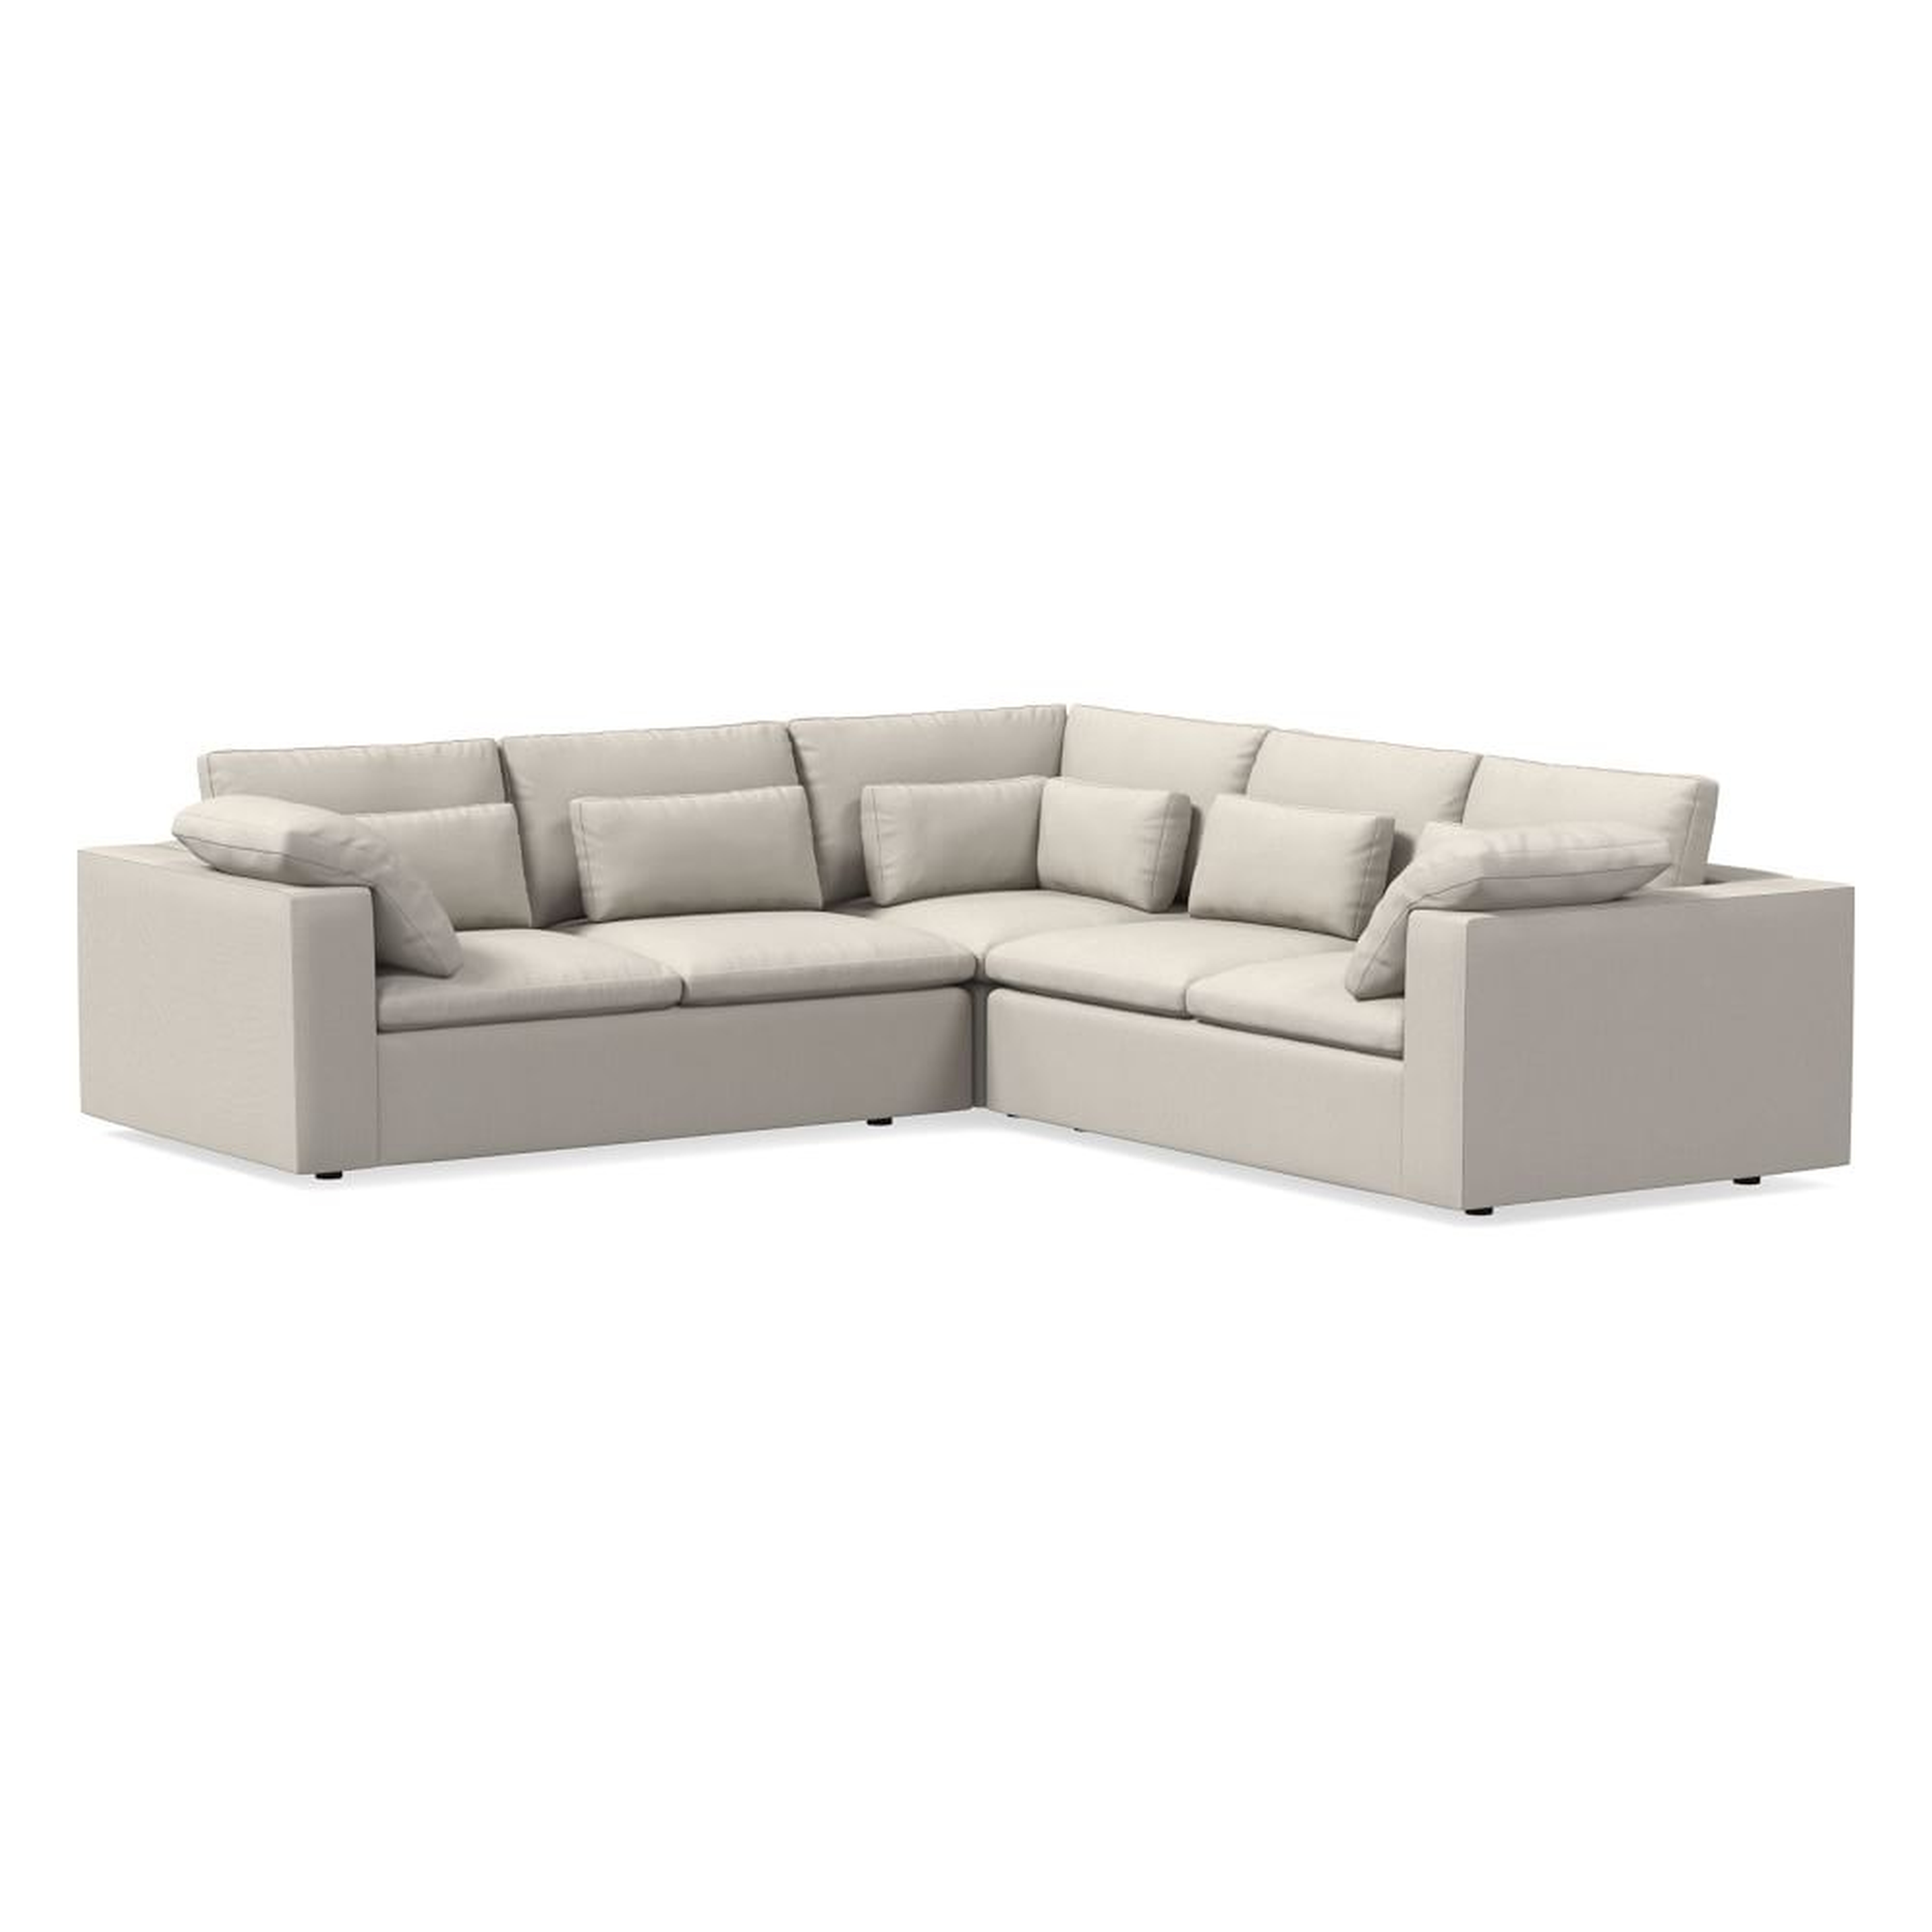 Harmony Modular 121" Multi Seat 3-Piece L-Shaped Sectional, Standard Depth, Performance Yarn Dyed Linen Weave, Alabaster - West Elm